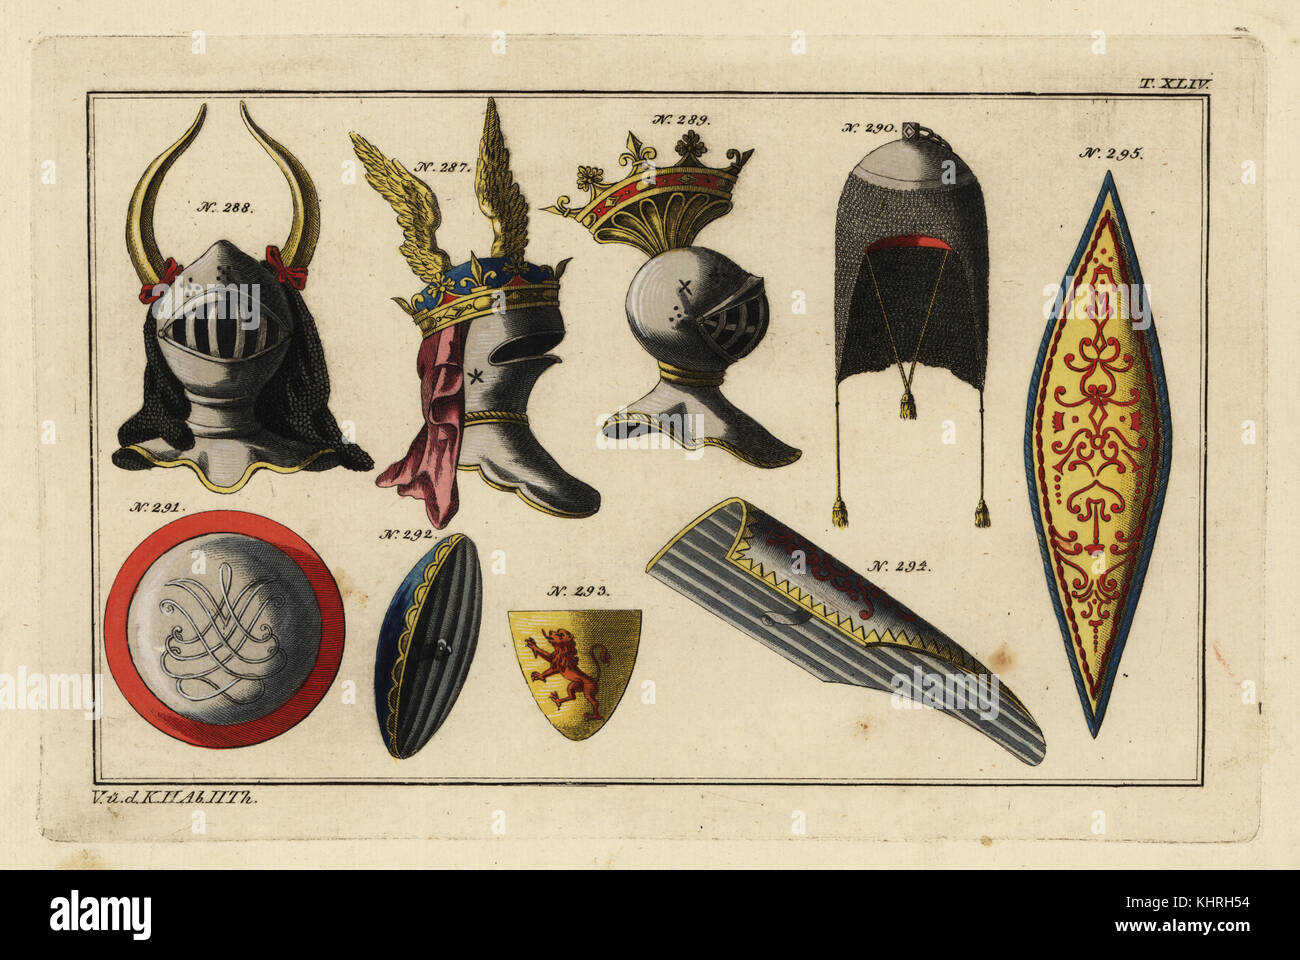 Knights' helms 287-9, chainmail hood worn under the helm 290, shields for knights on horseback 291-293, and shields for knights on foot 294, 295. Taken from Gabriel Daniel's Histoire de la milice francoise, 1721. Handcoloured copperplate engraving from Robert von Spalart's Historical Picture of the Costumes of the Principal People of Antiquity and of the Middle Ages, Chez Collignon, Metz, 1810. Stock Photo